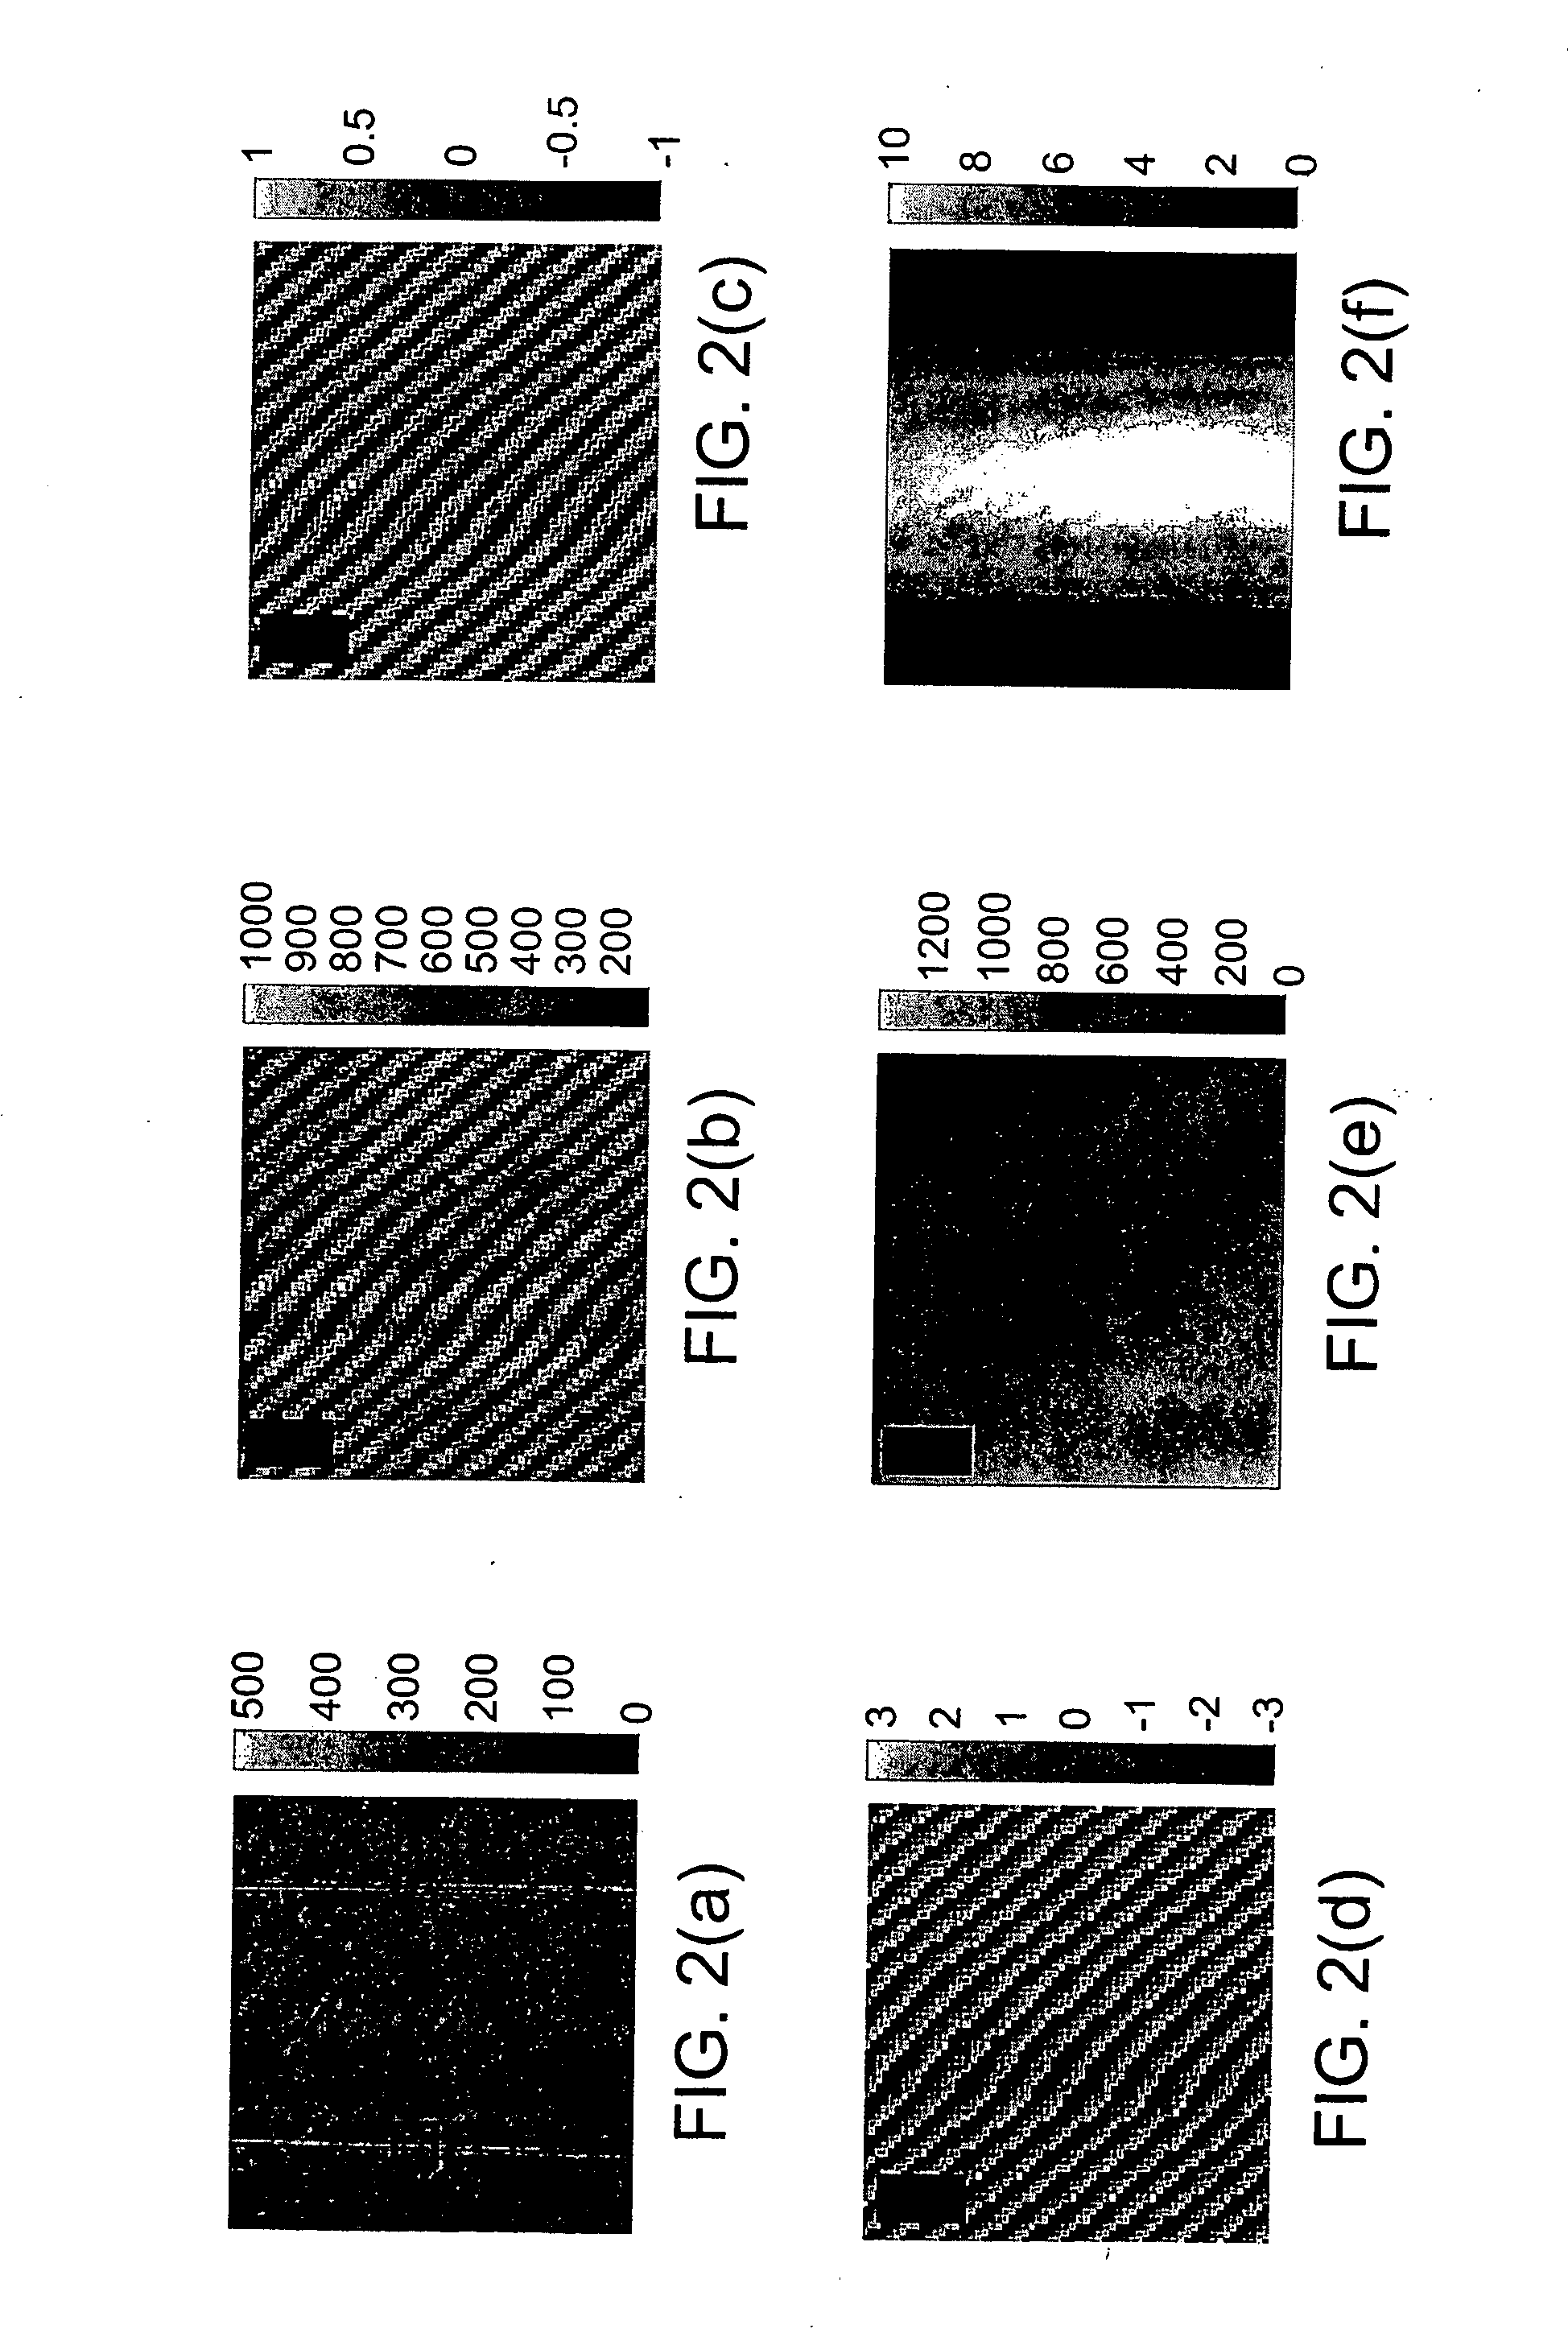 System and method for Hilbert phase imaging